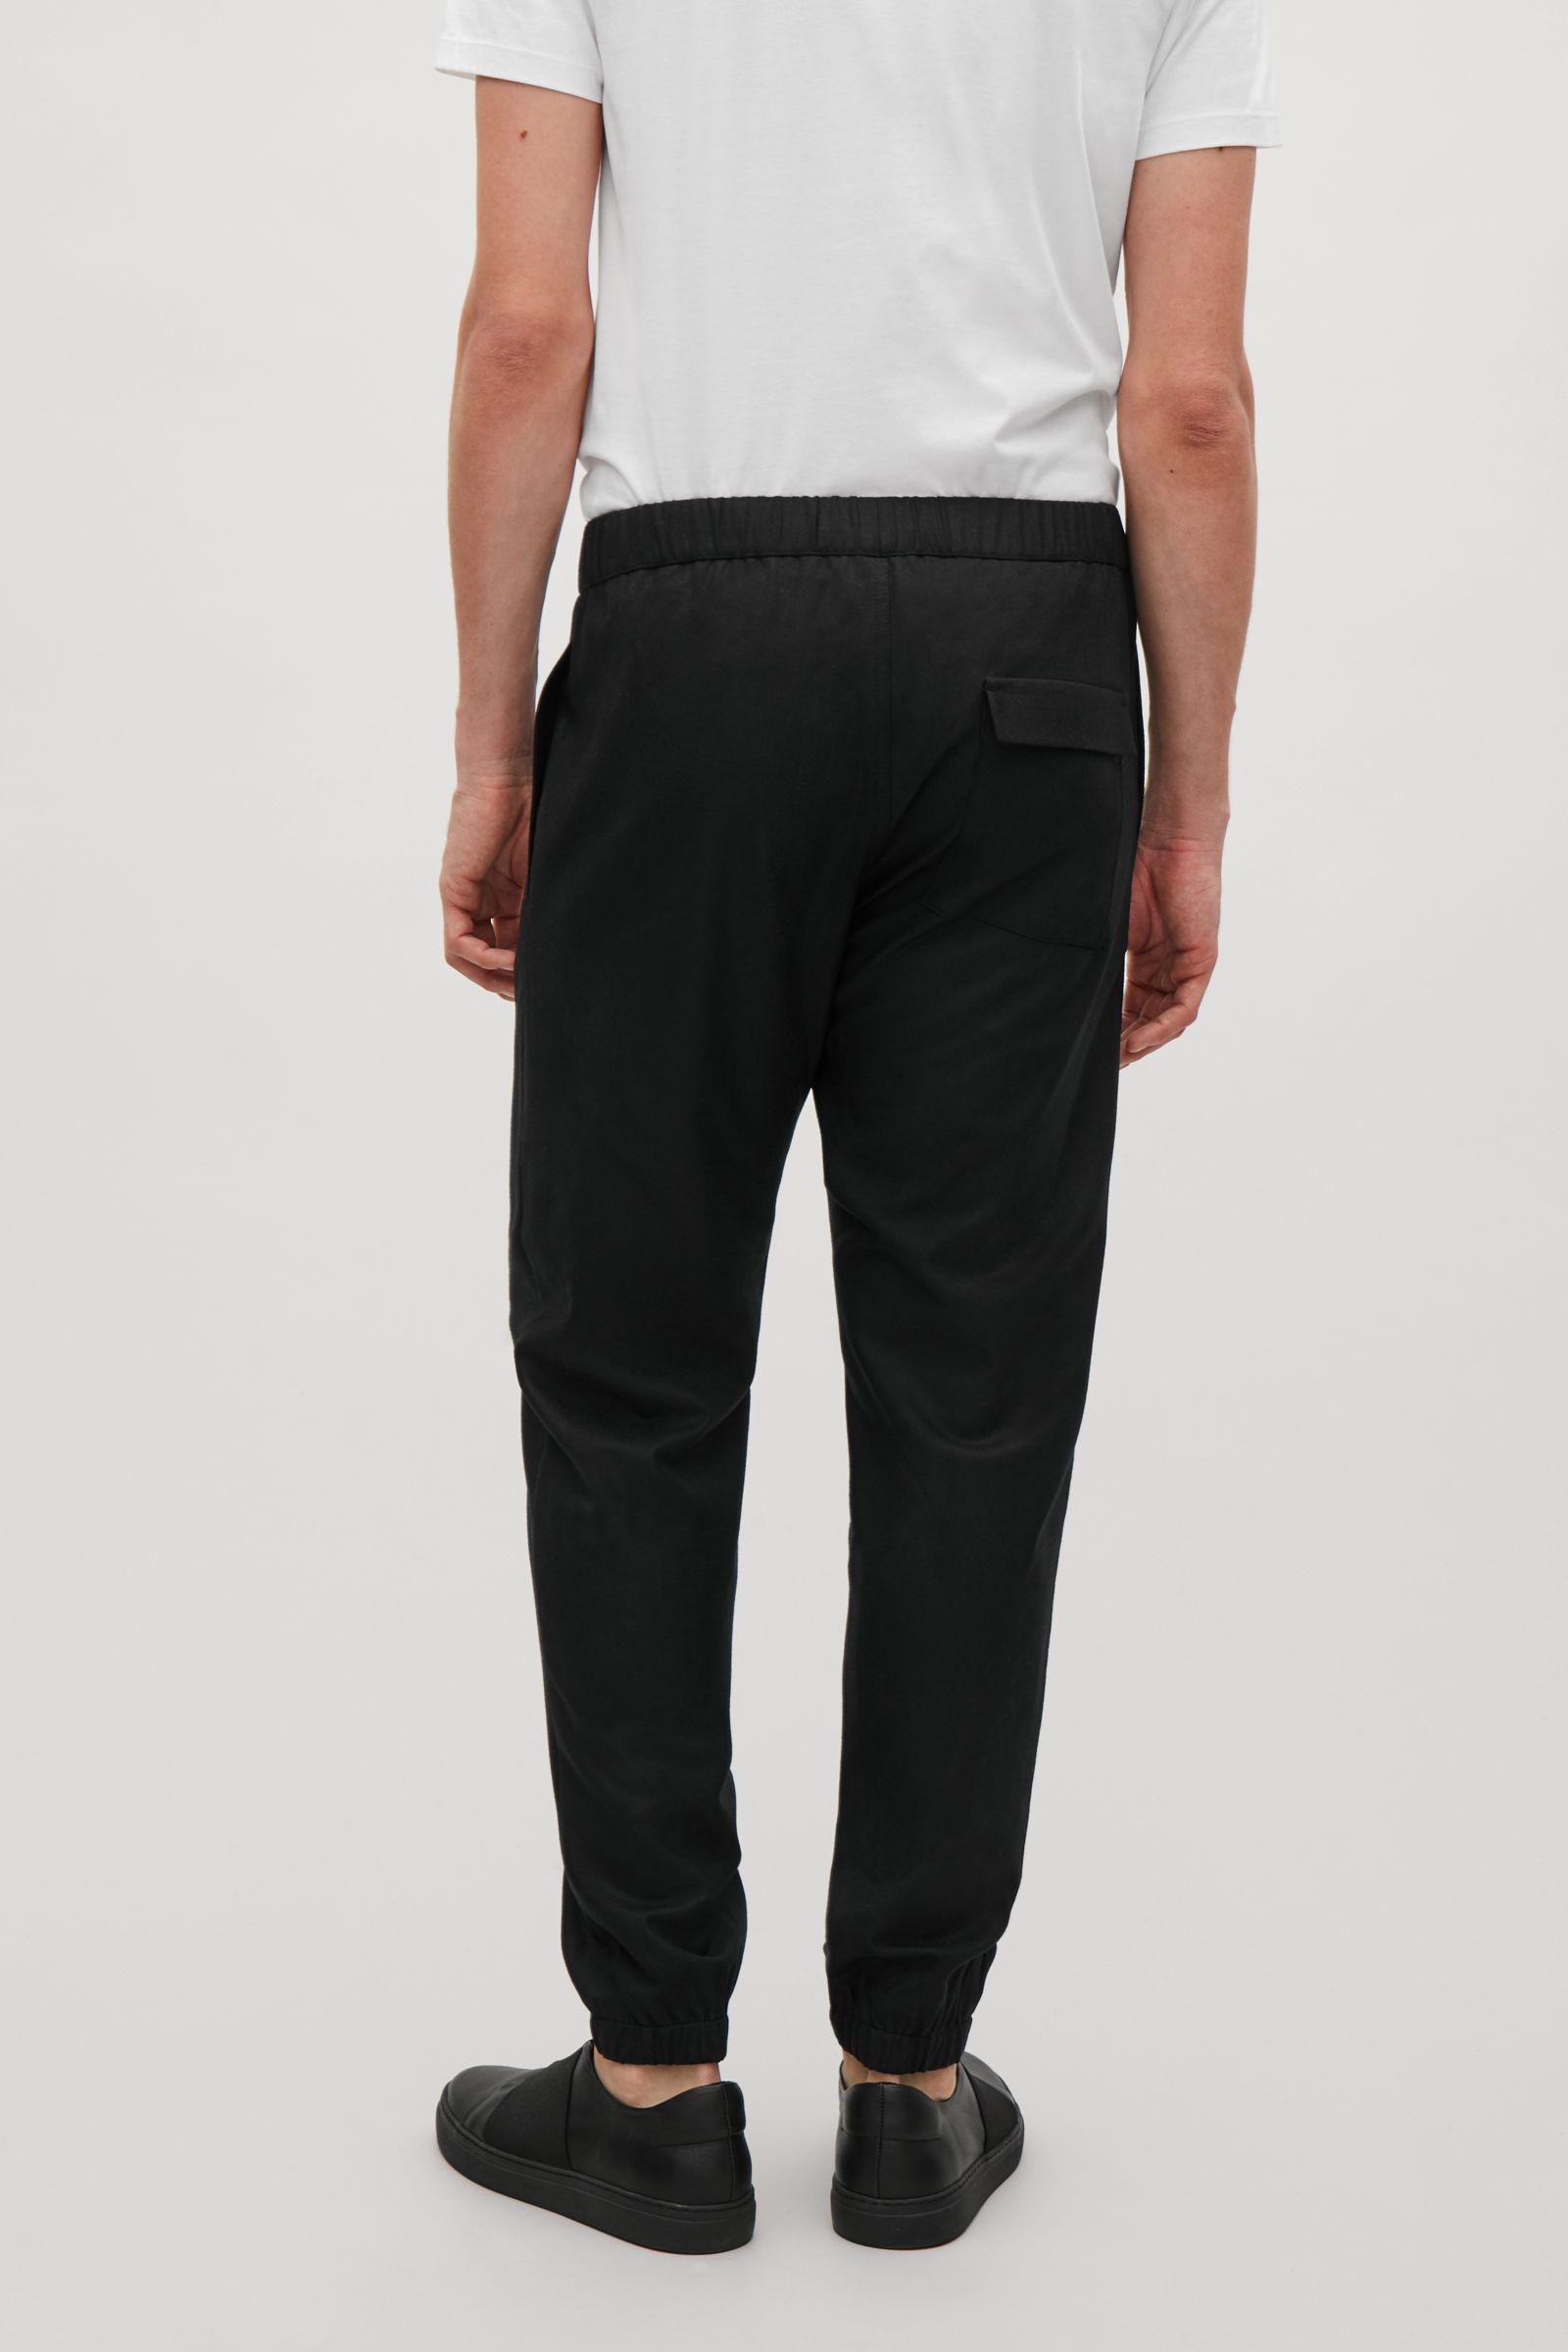 COS Elasticated Wool Trousers in Black for Men - Lyst